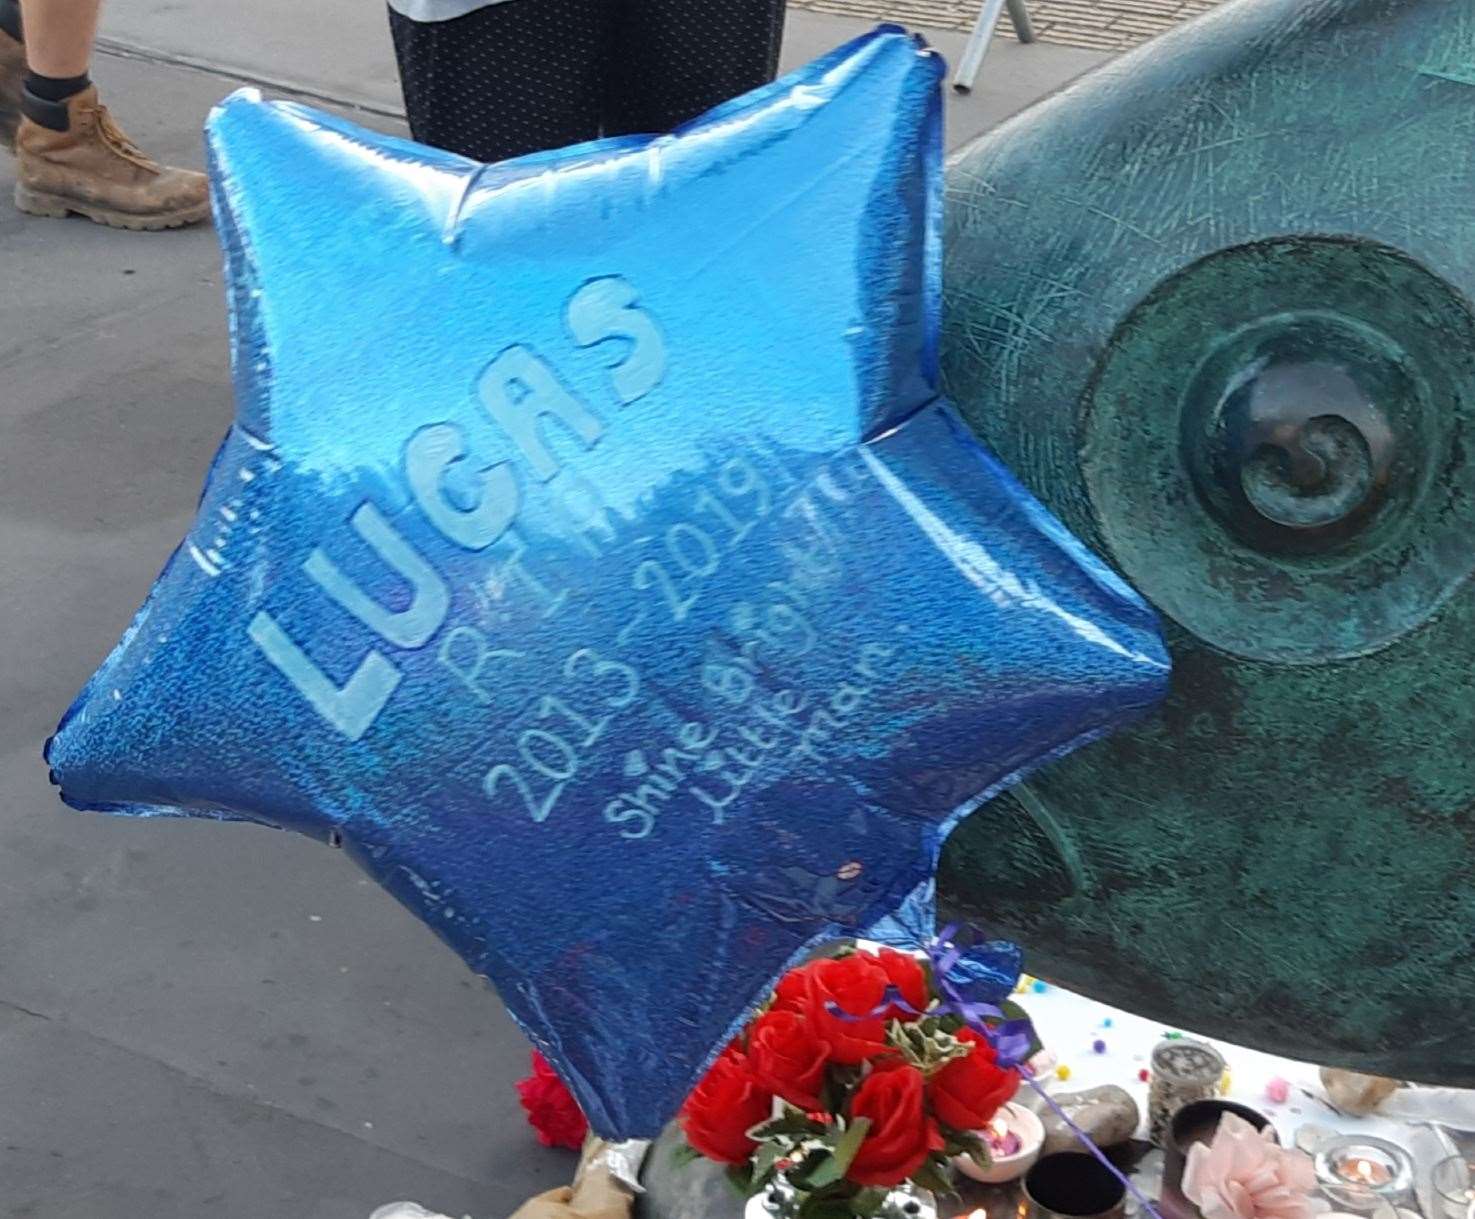 One of the tributes for Lucas